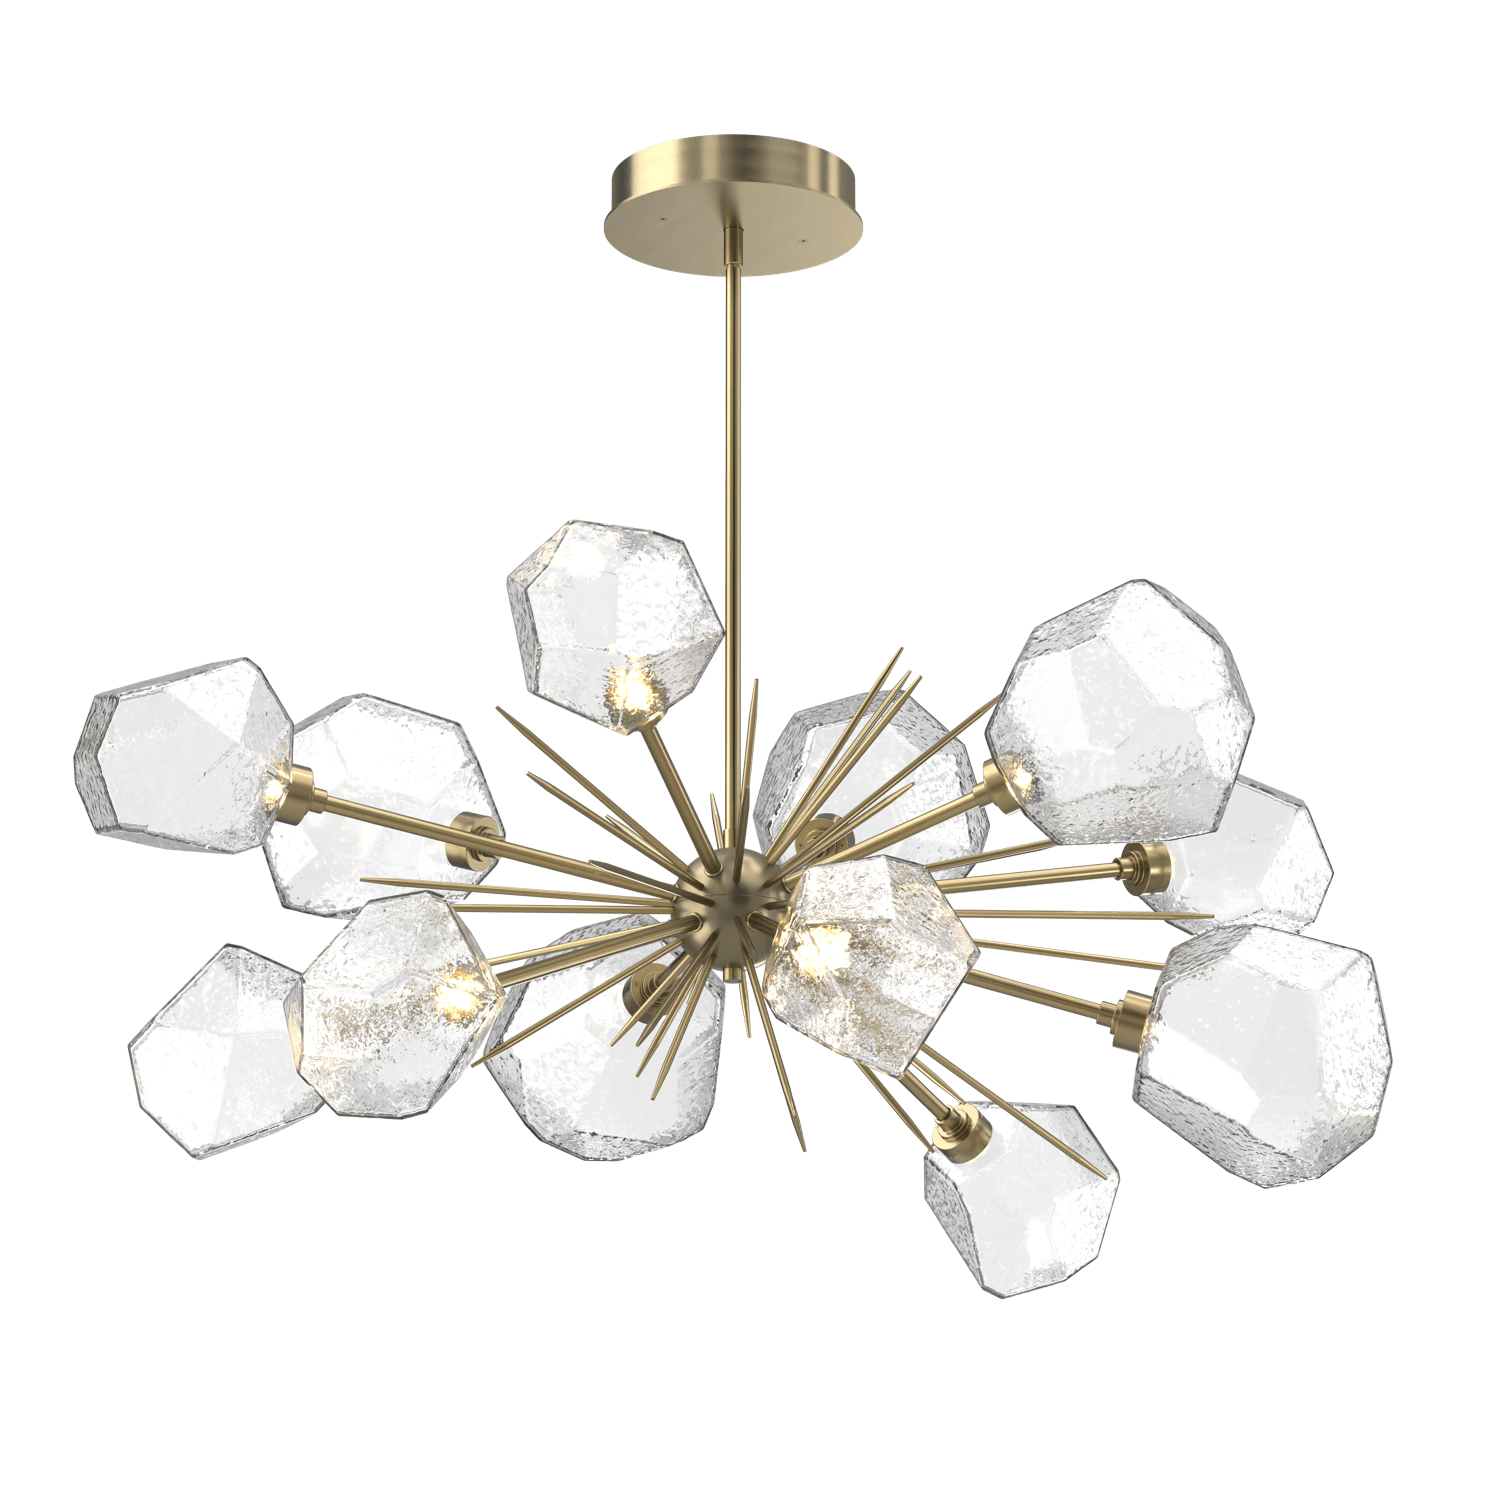 PLB0039-0D-HB-C-Hammerton-Studio-Gem-43-inch-oval-starburst-chandelier-with-heritage-brass-finish-and-clear-blown-glass-shades-and-LED-lamping